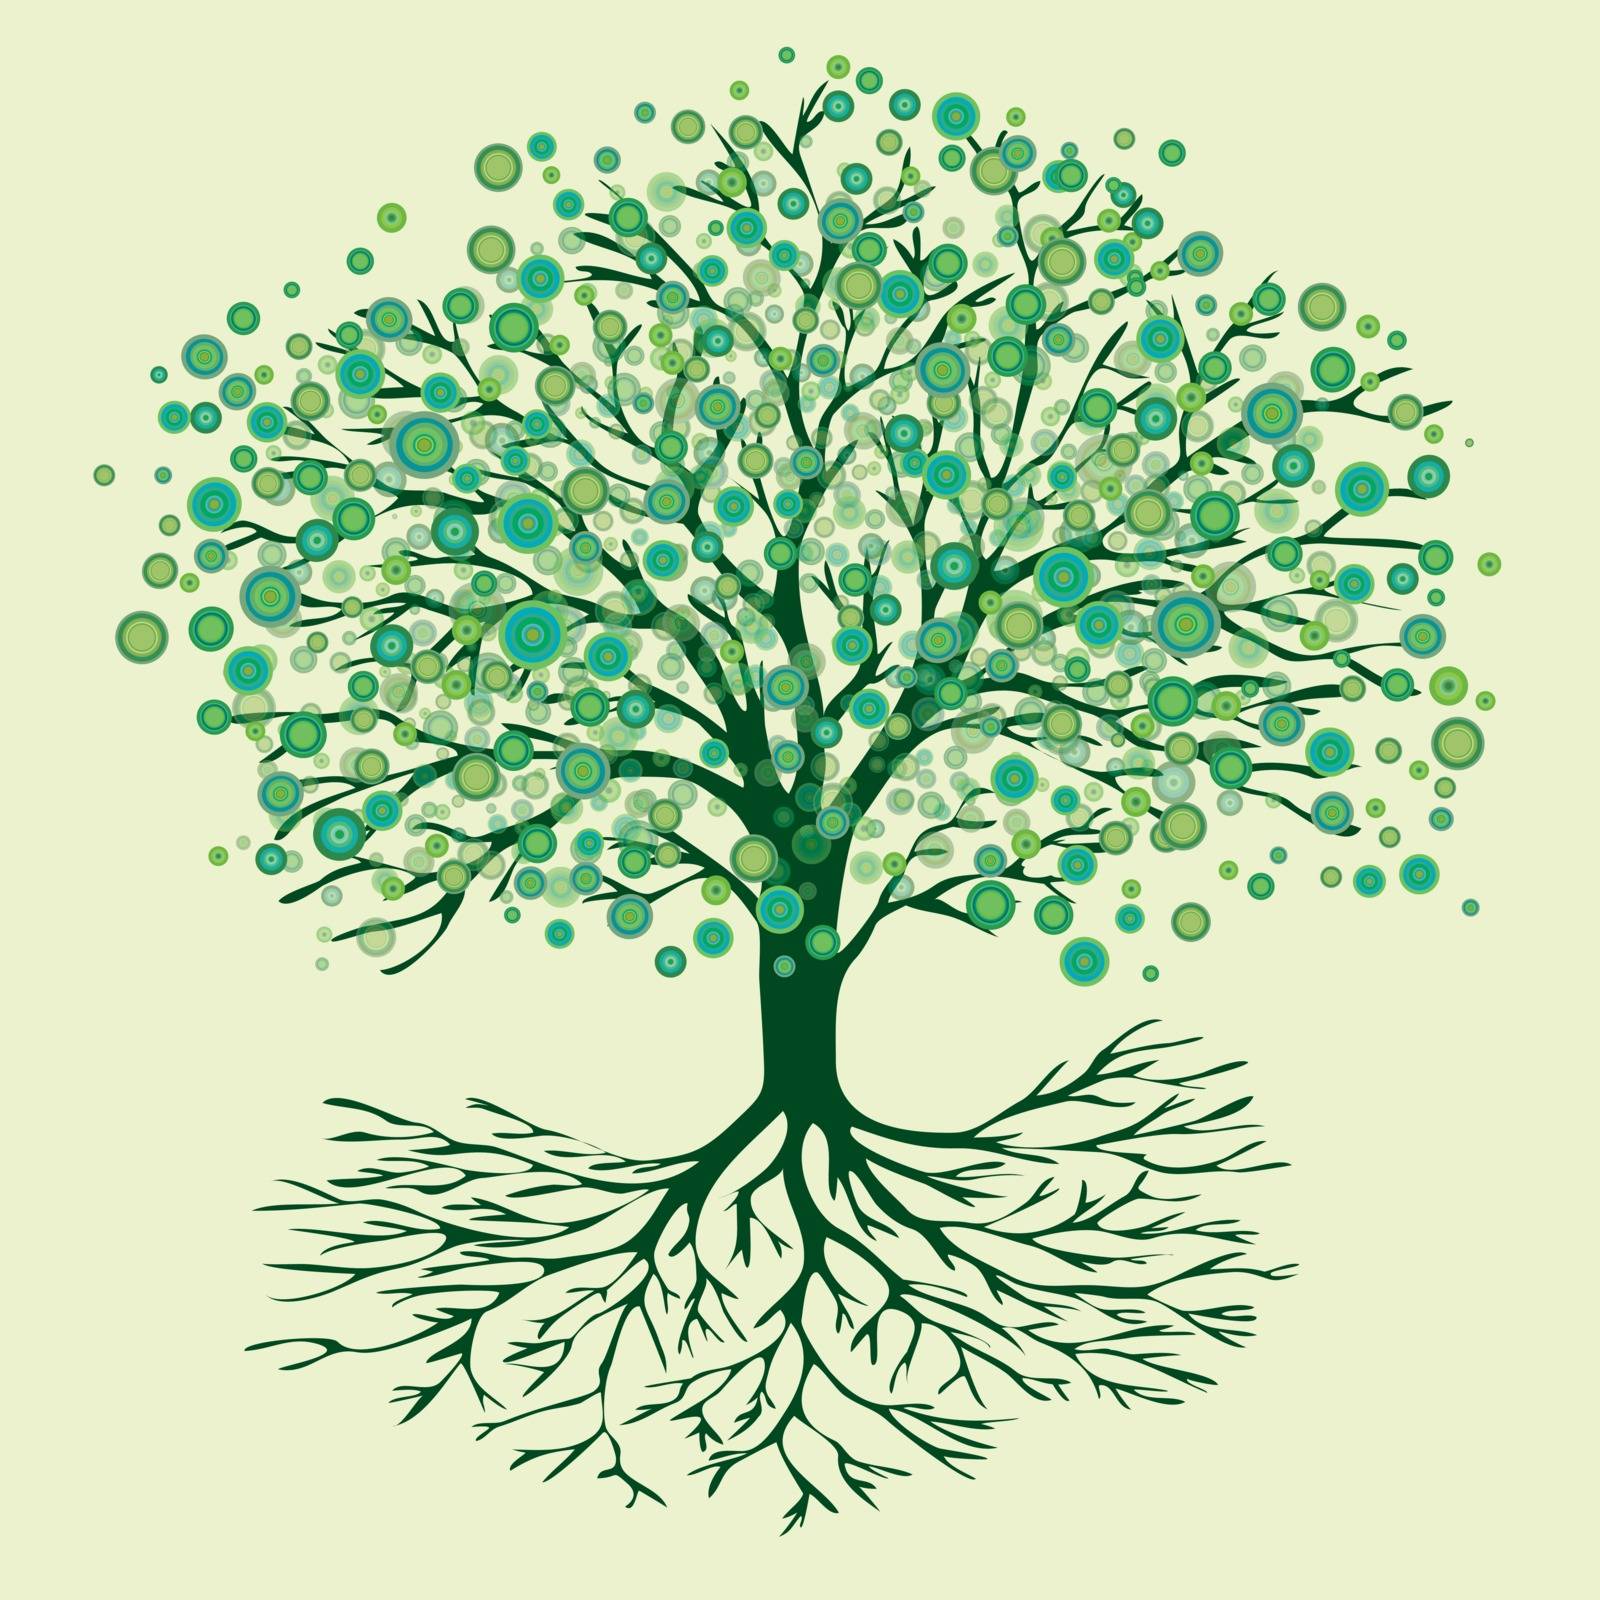 A vector illustration of a tree of life with abstract round green flowers